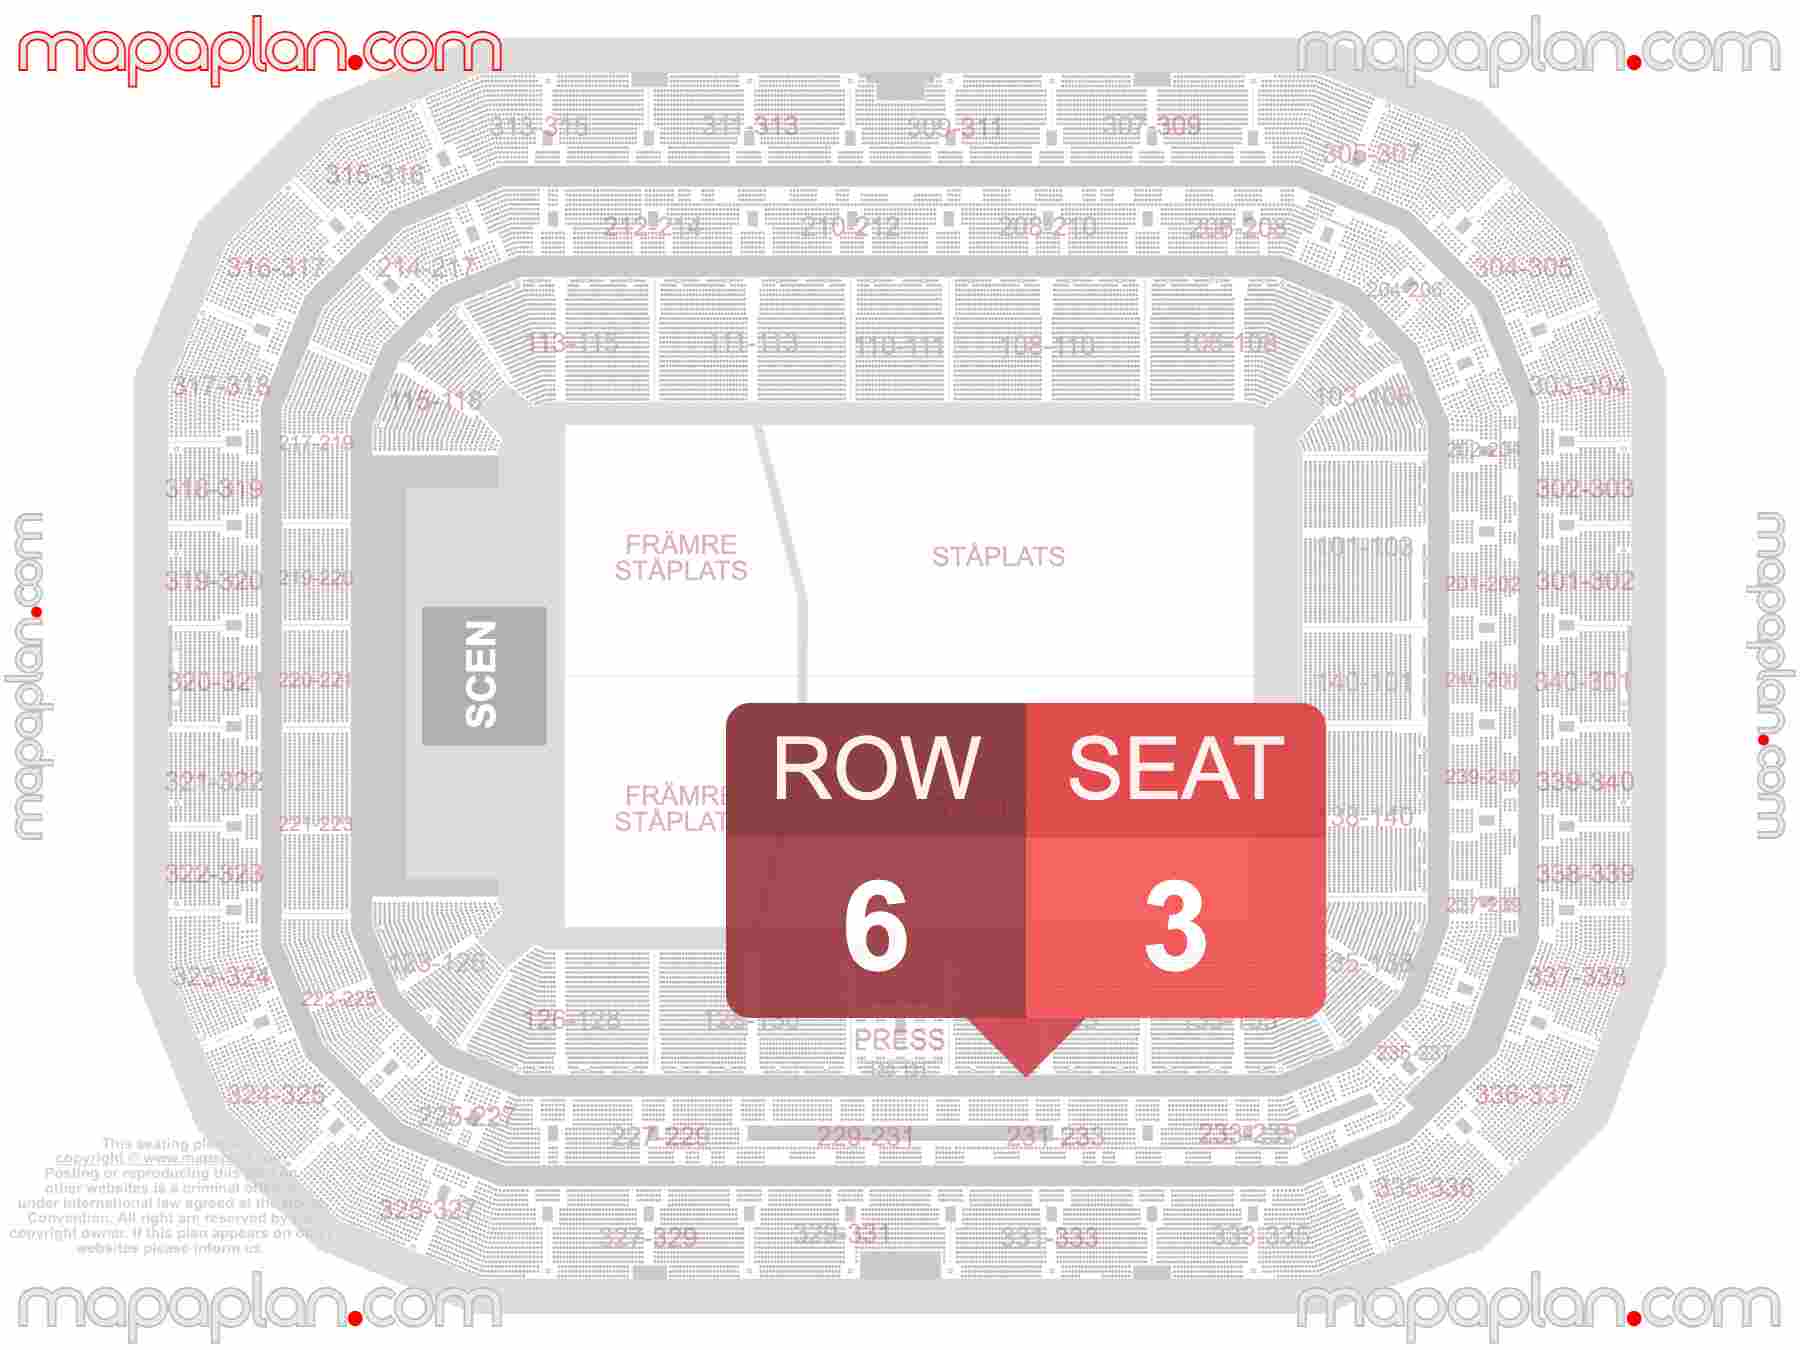 Stockholm Strawberry Friends Arena seating plan Concerts sittplatser karta med sektioner seating plan with exact section numbers showing best rows and seats selection 3d layout - Best interactive seat finder tool with precise detailed location data